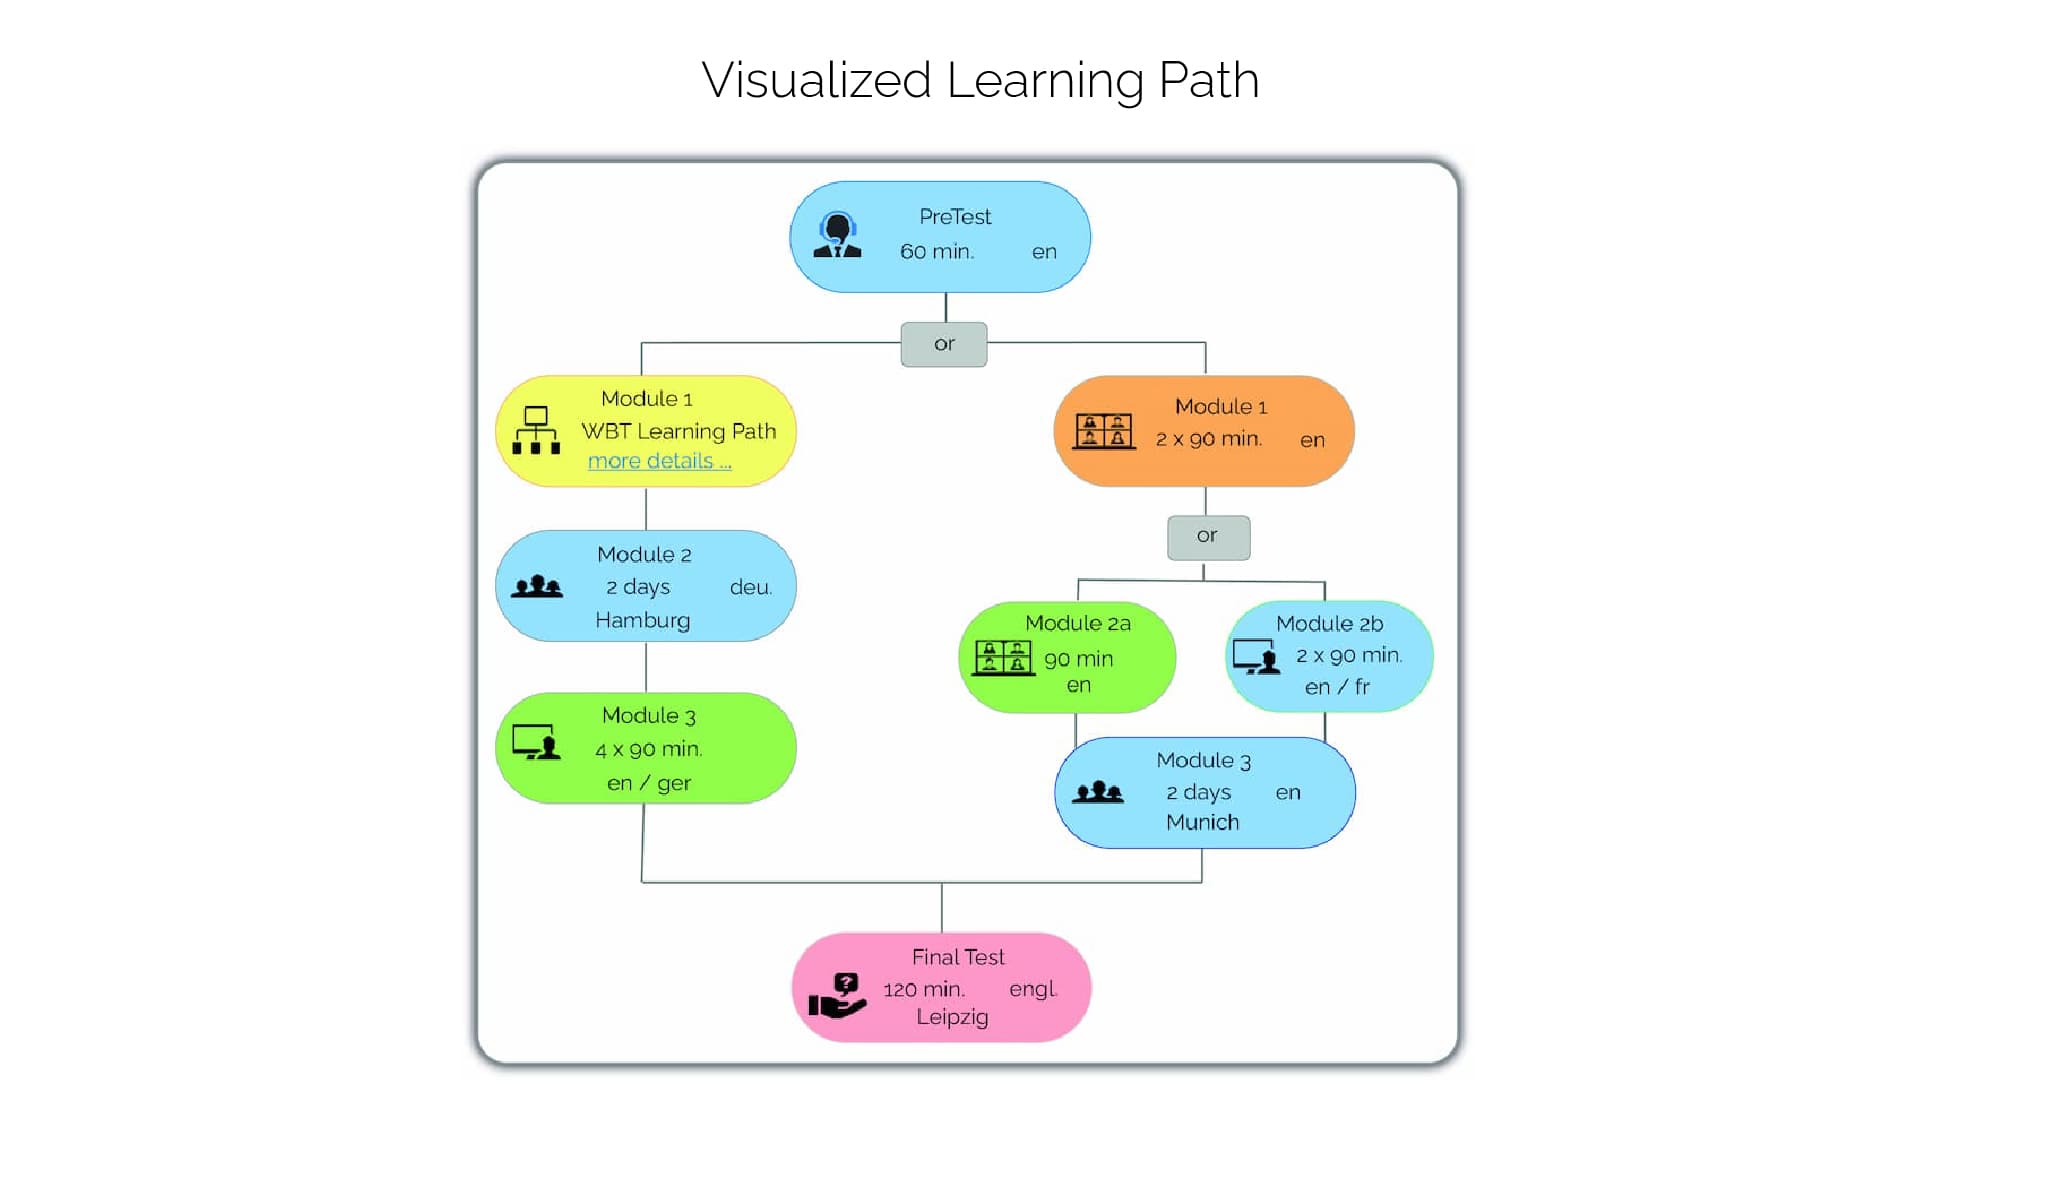 Visualizing a Blended Learning Path